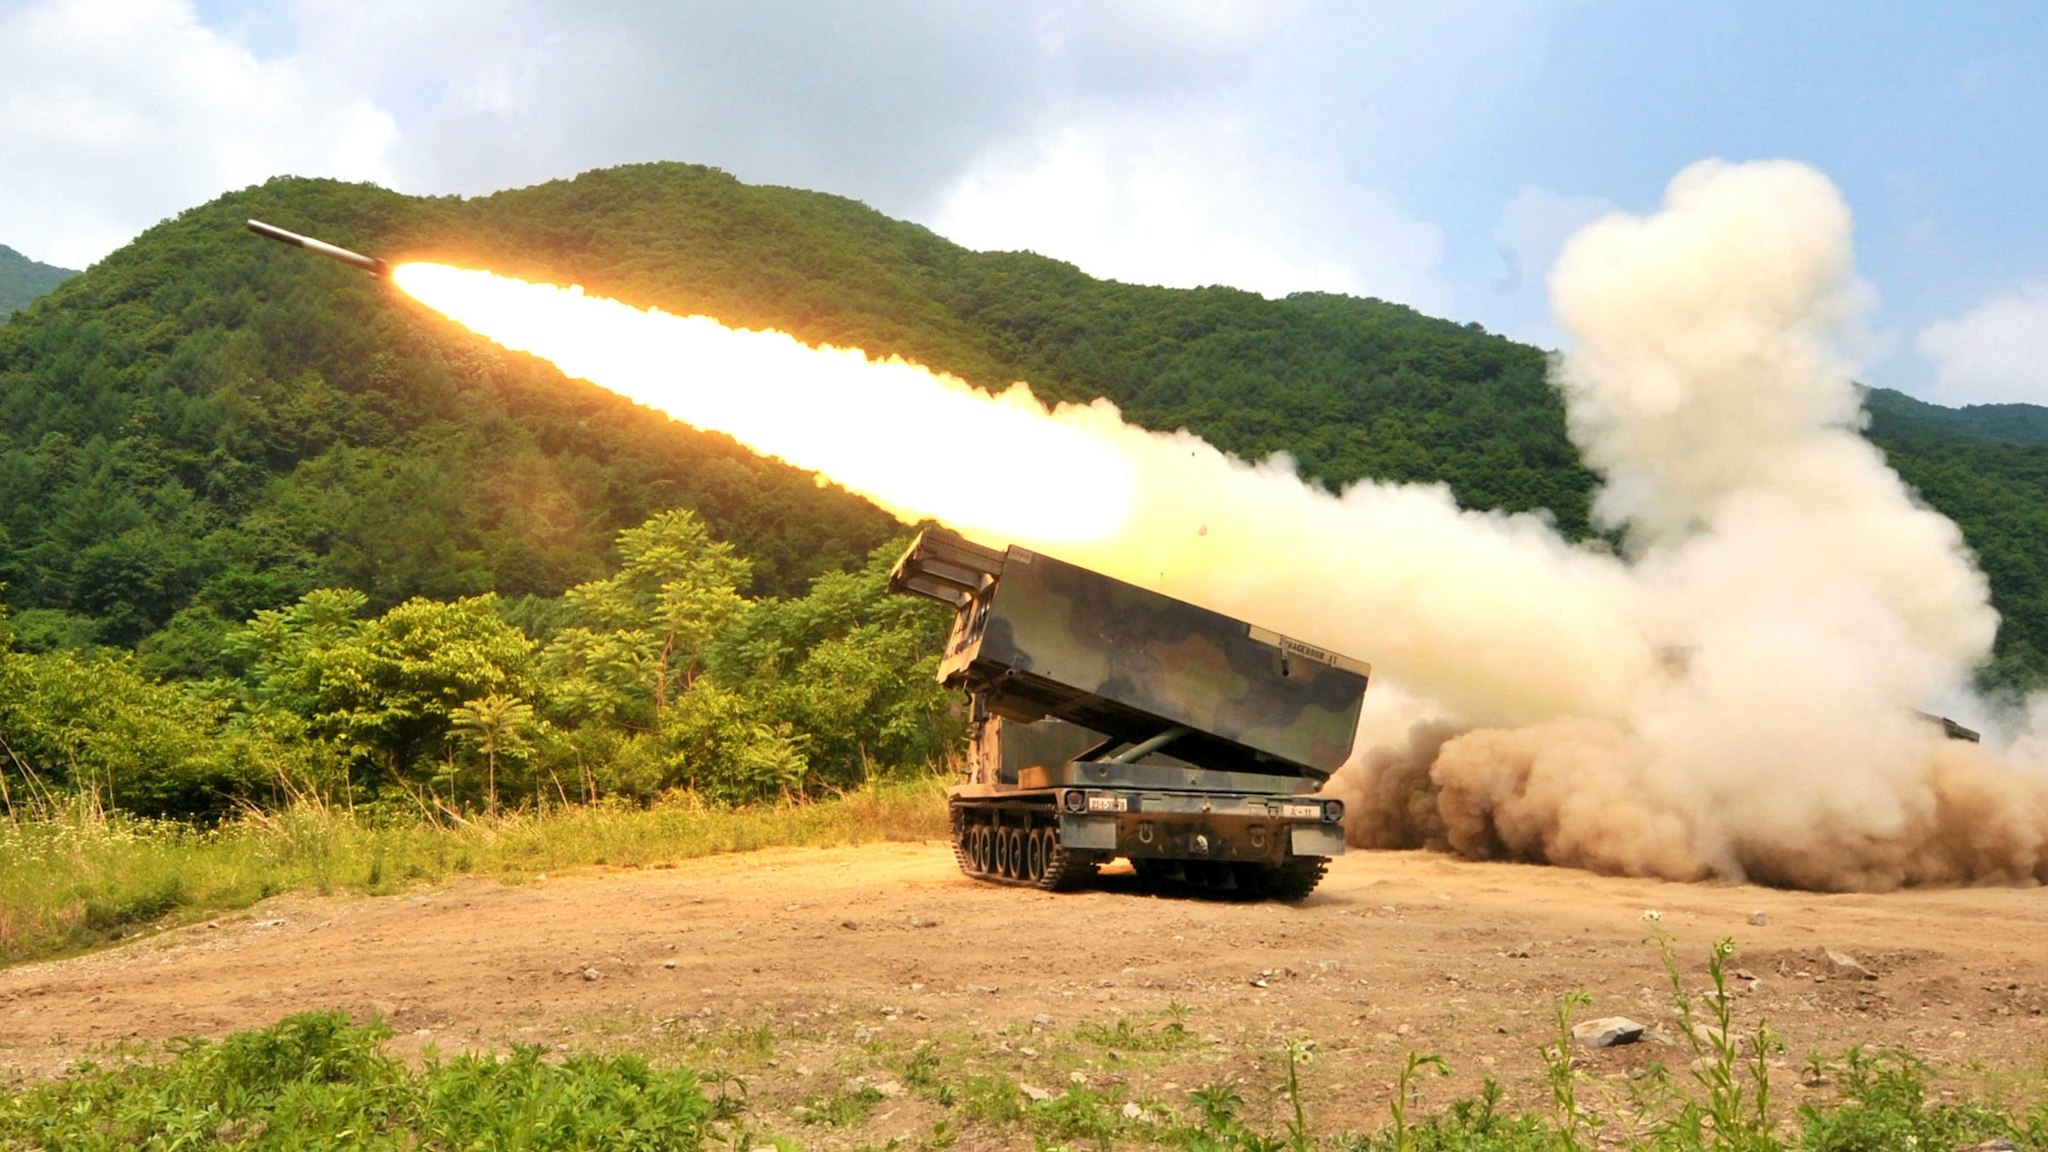 US Multiple Launch Rocket System (MLRS) launches a rocket into the air during a live fire training exercise in the South Korean border county of Cheorwon on June 12, 2012. The US military in South Korea has asked the Pentagon to provide more attack helicopters and strengthen missile defence systems, its chief said, amid threats by North Korea against the South.